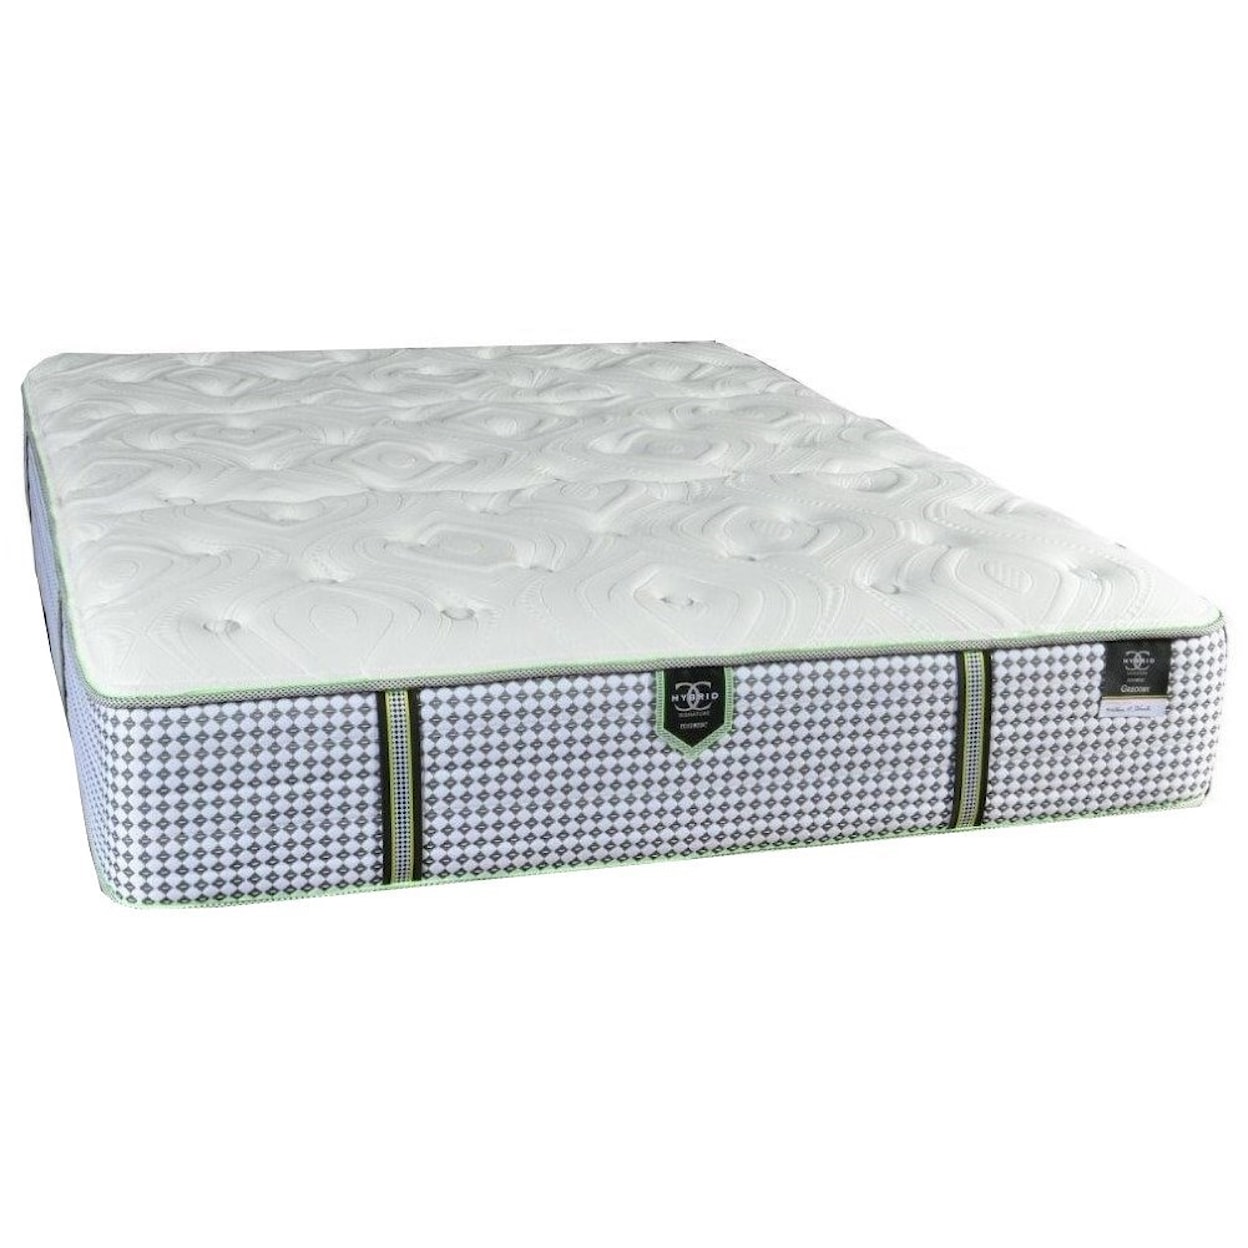 Restonic Gregory Firm King Pocketed Coil Mattress